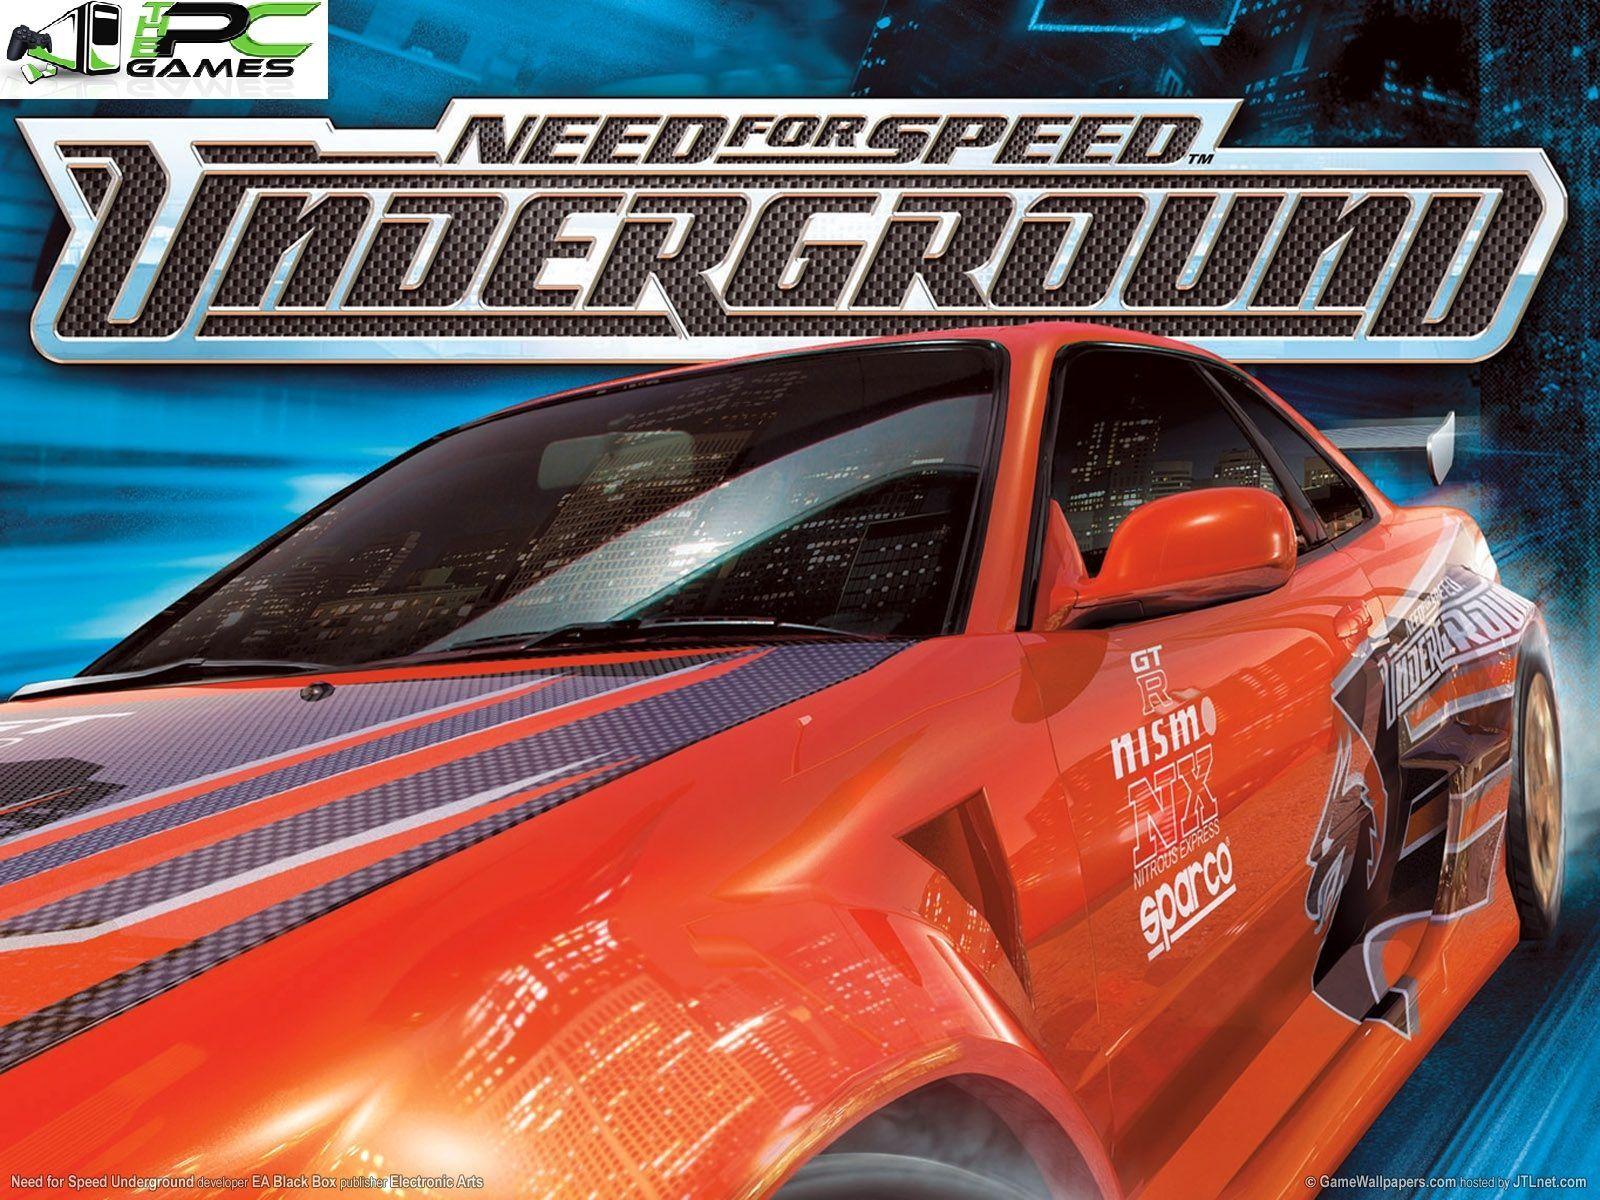 Need for Speed Underground Pc Game is the seventh installment in